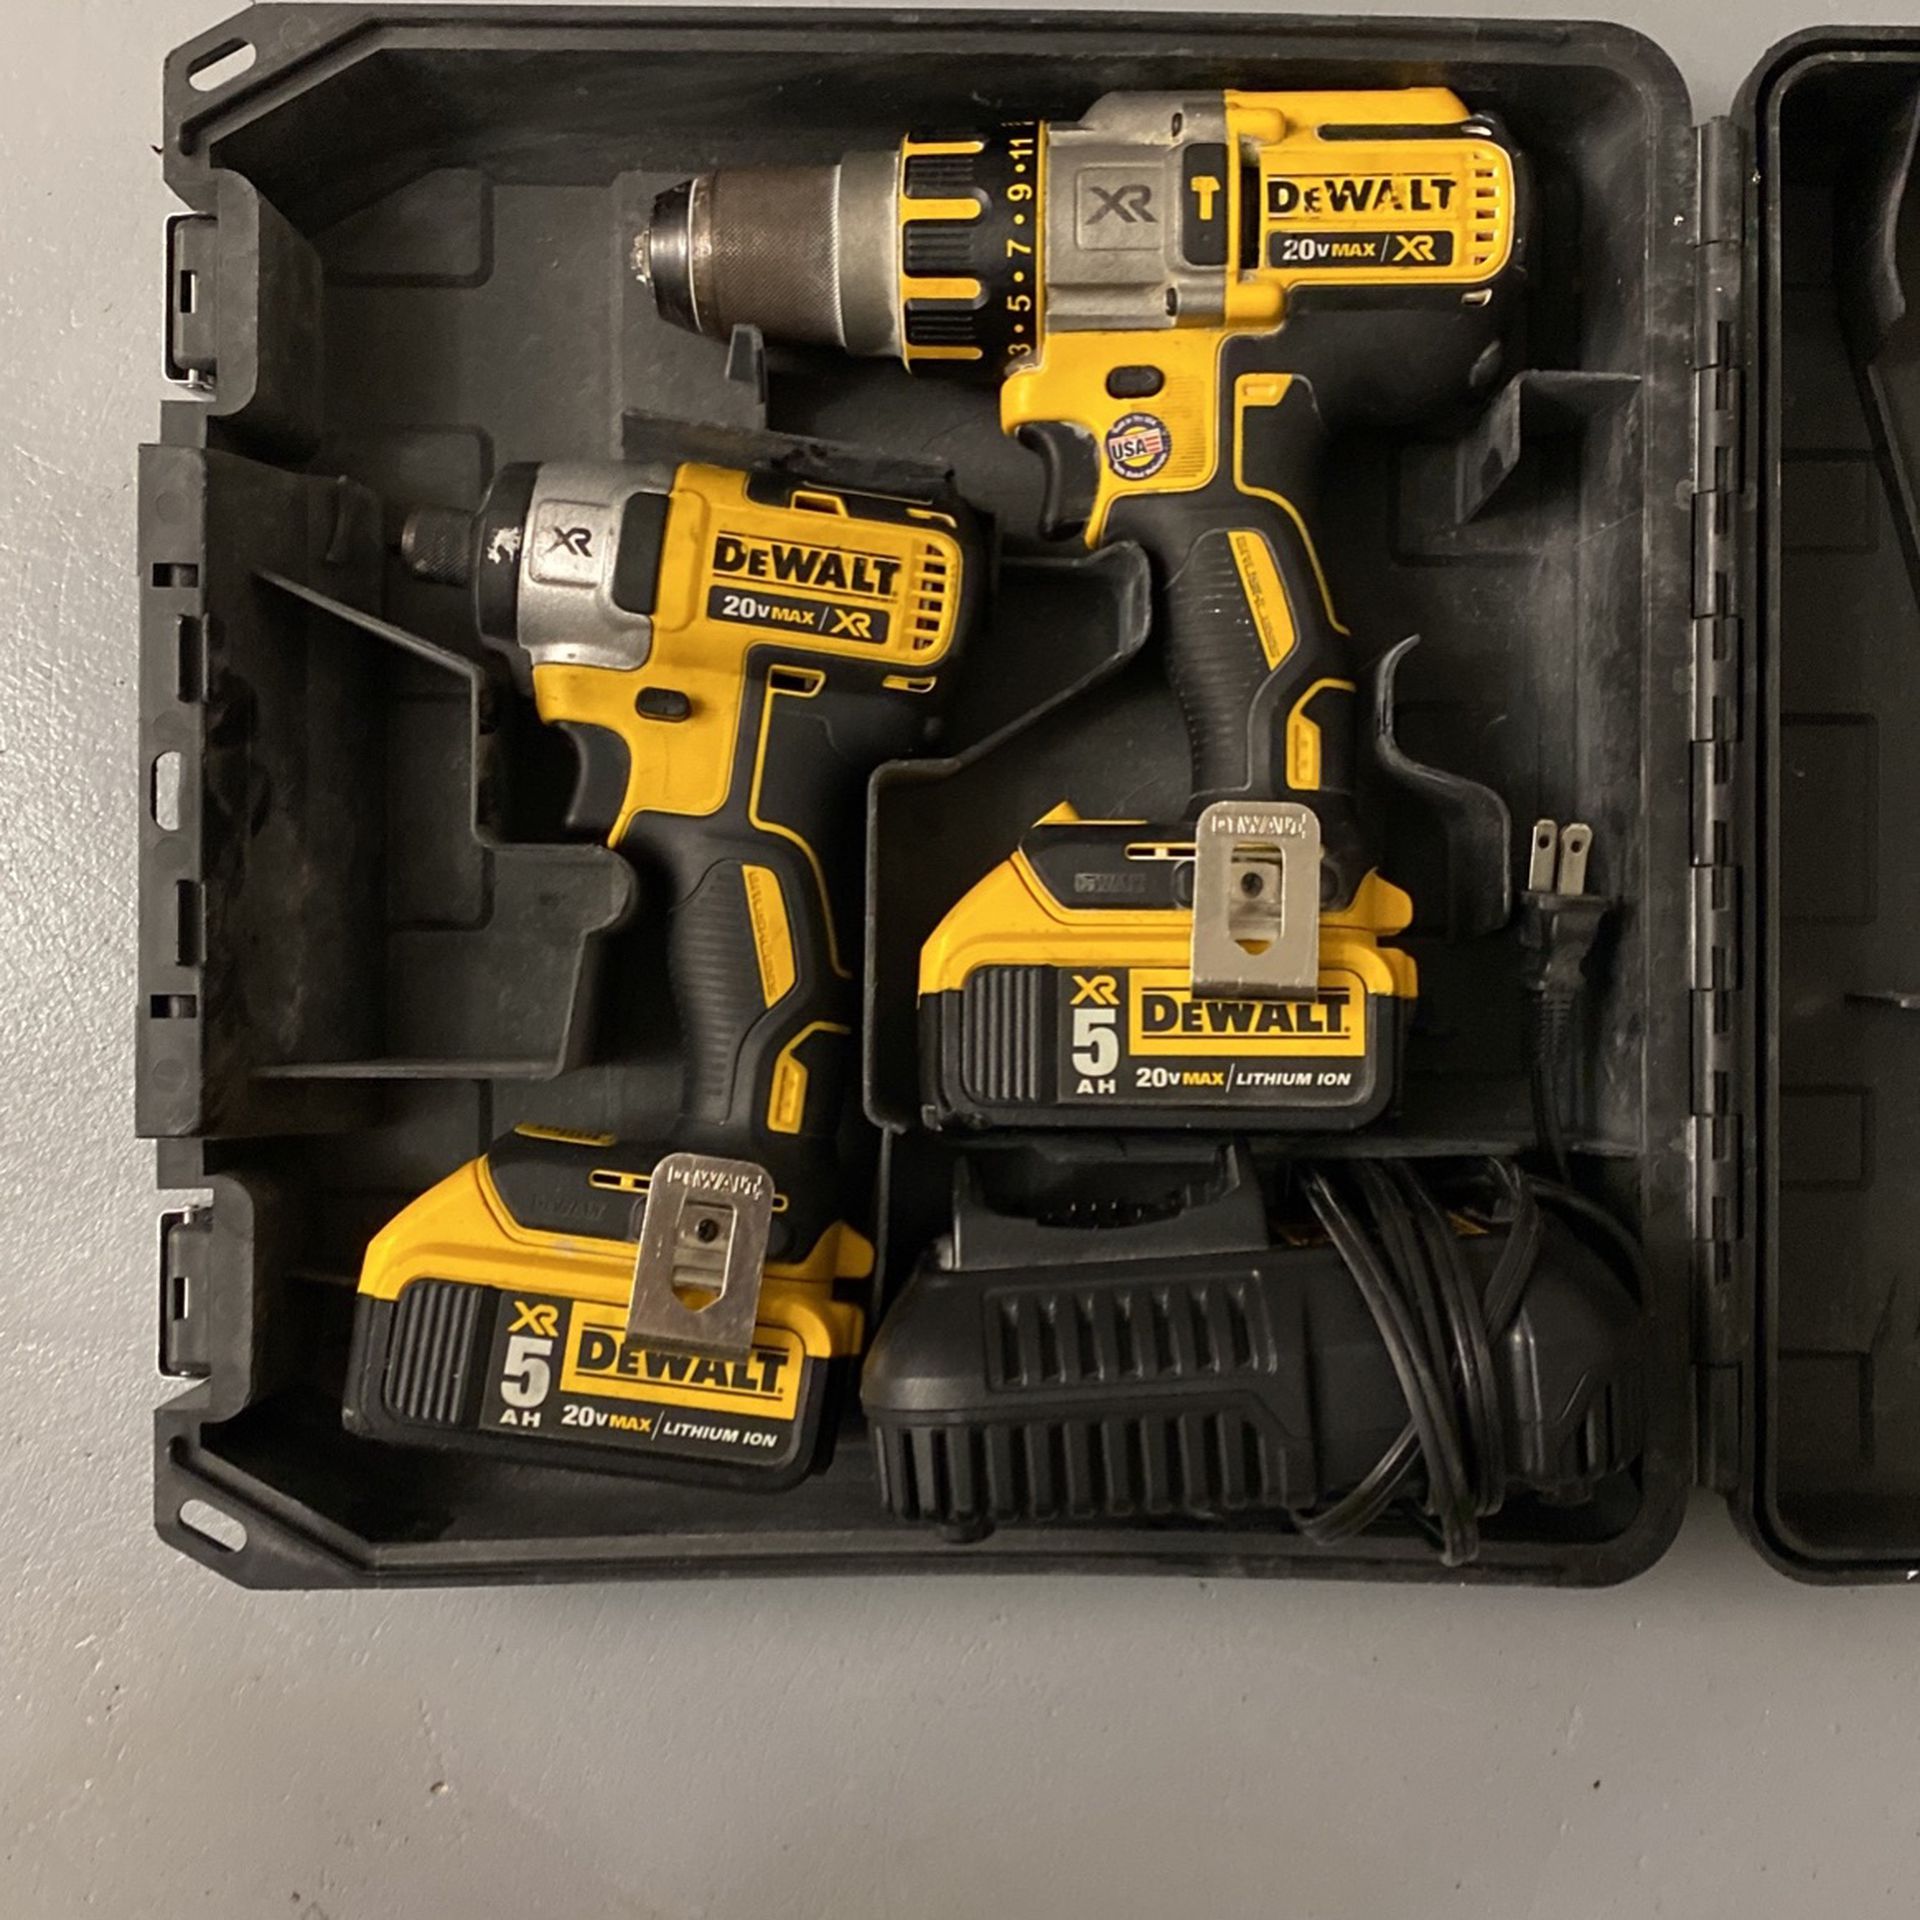 Dewalt 20v Combo Kit Hammer Drill And Impact W/ 2 5ah Batteries And Charger